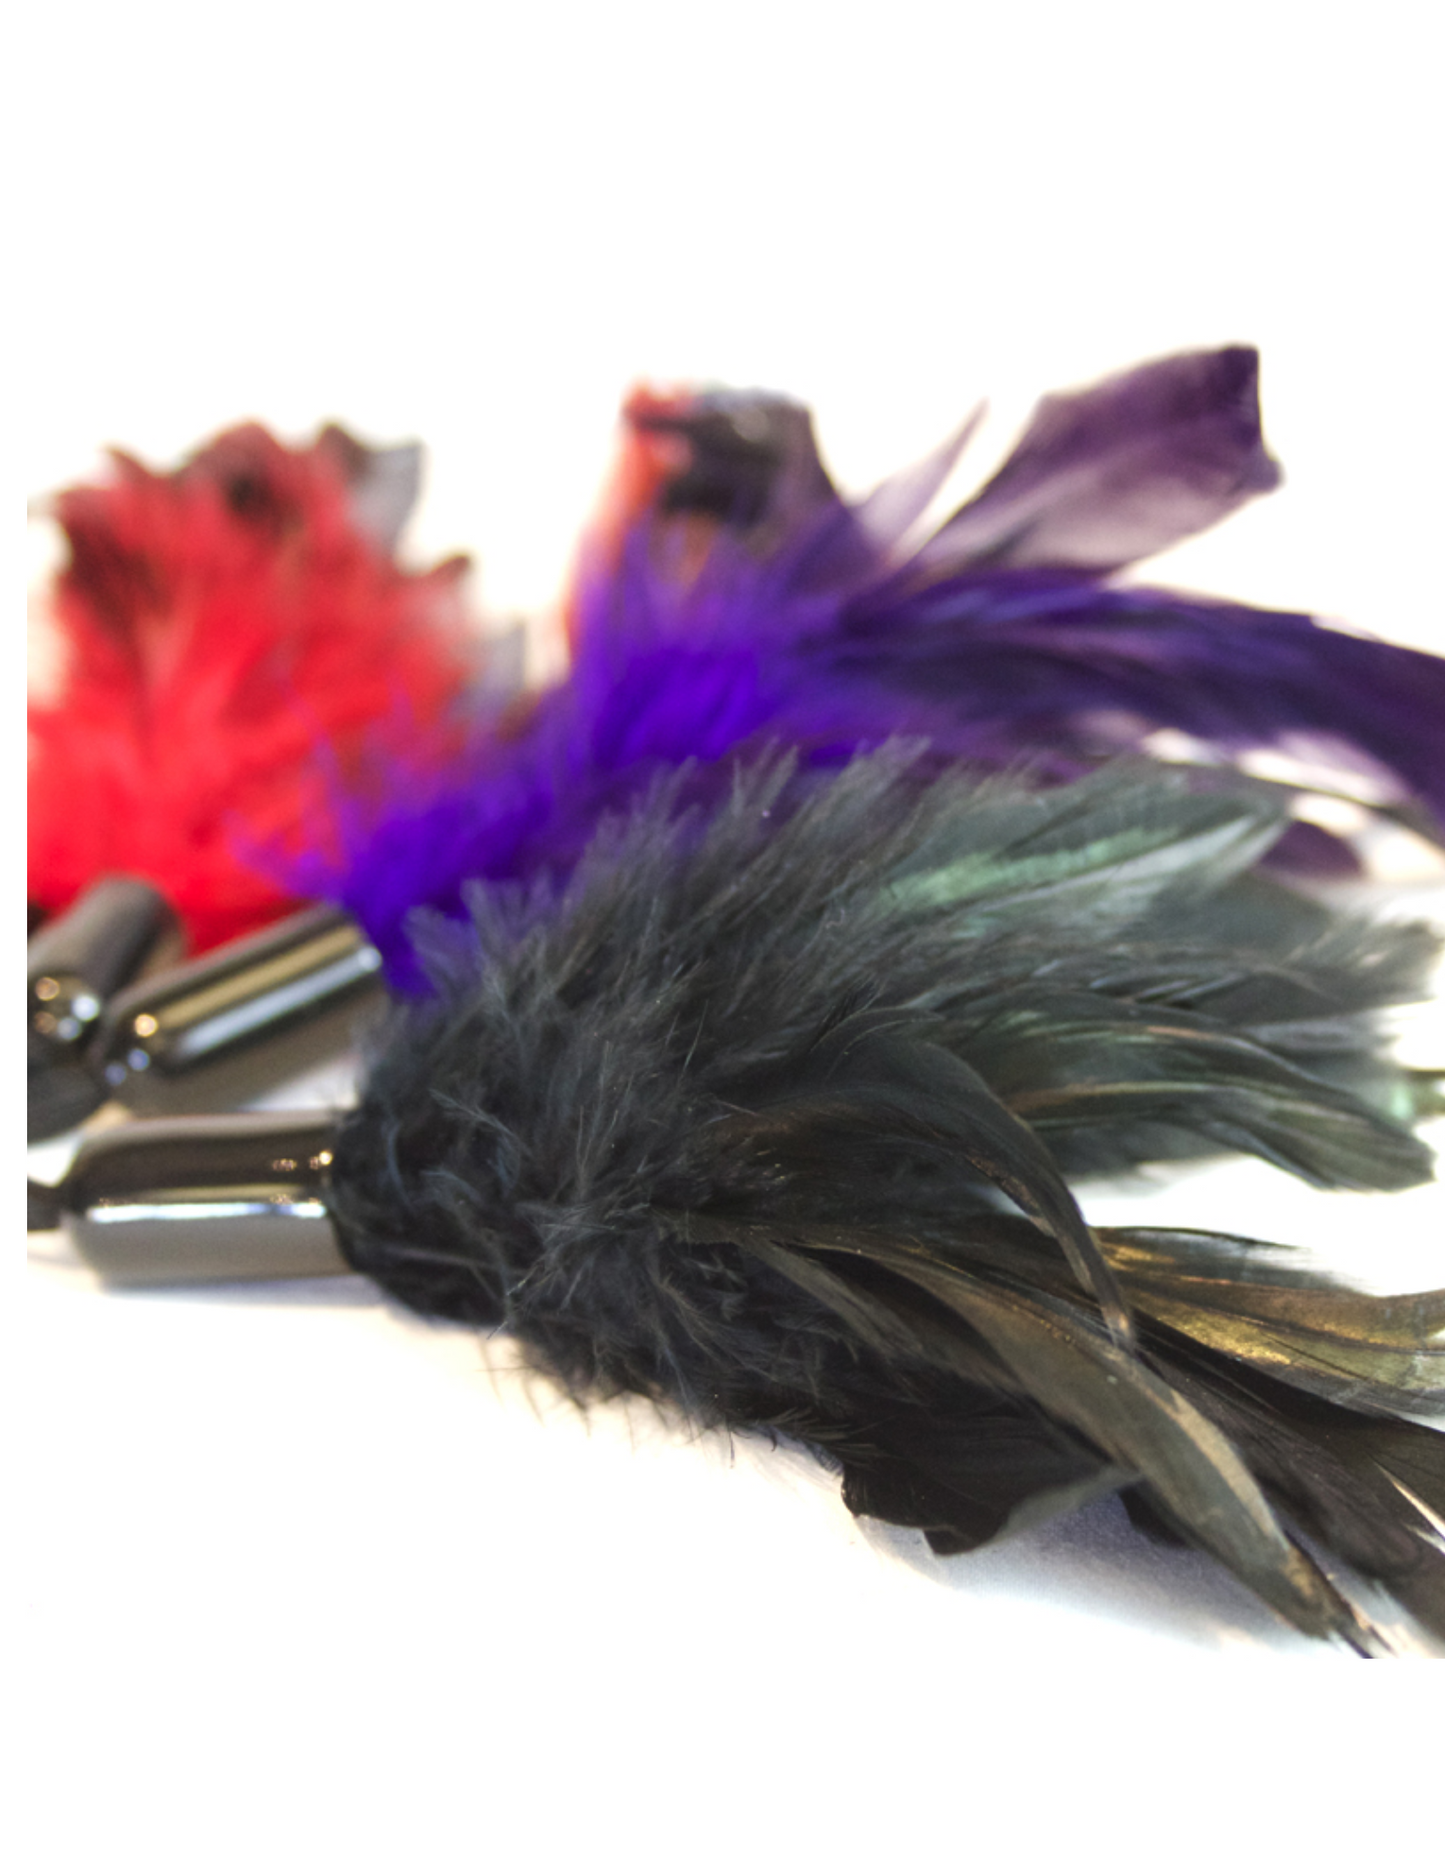 Photo of the Sportsheets Pleasure Feather color options.